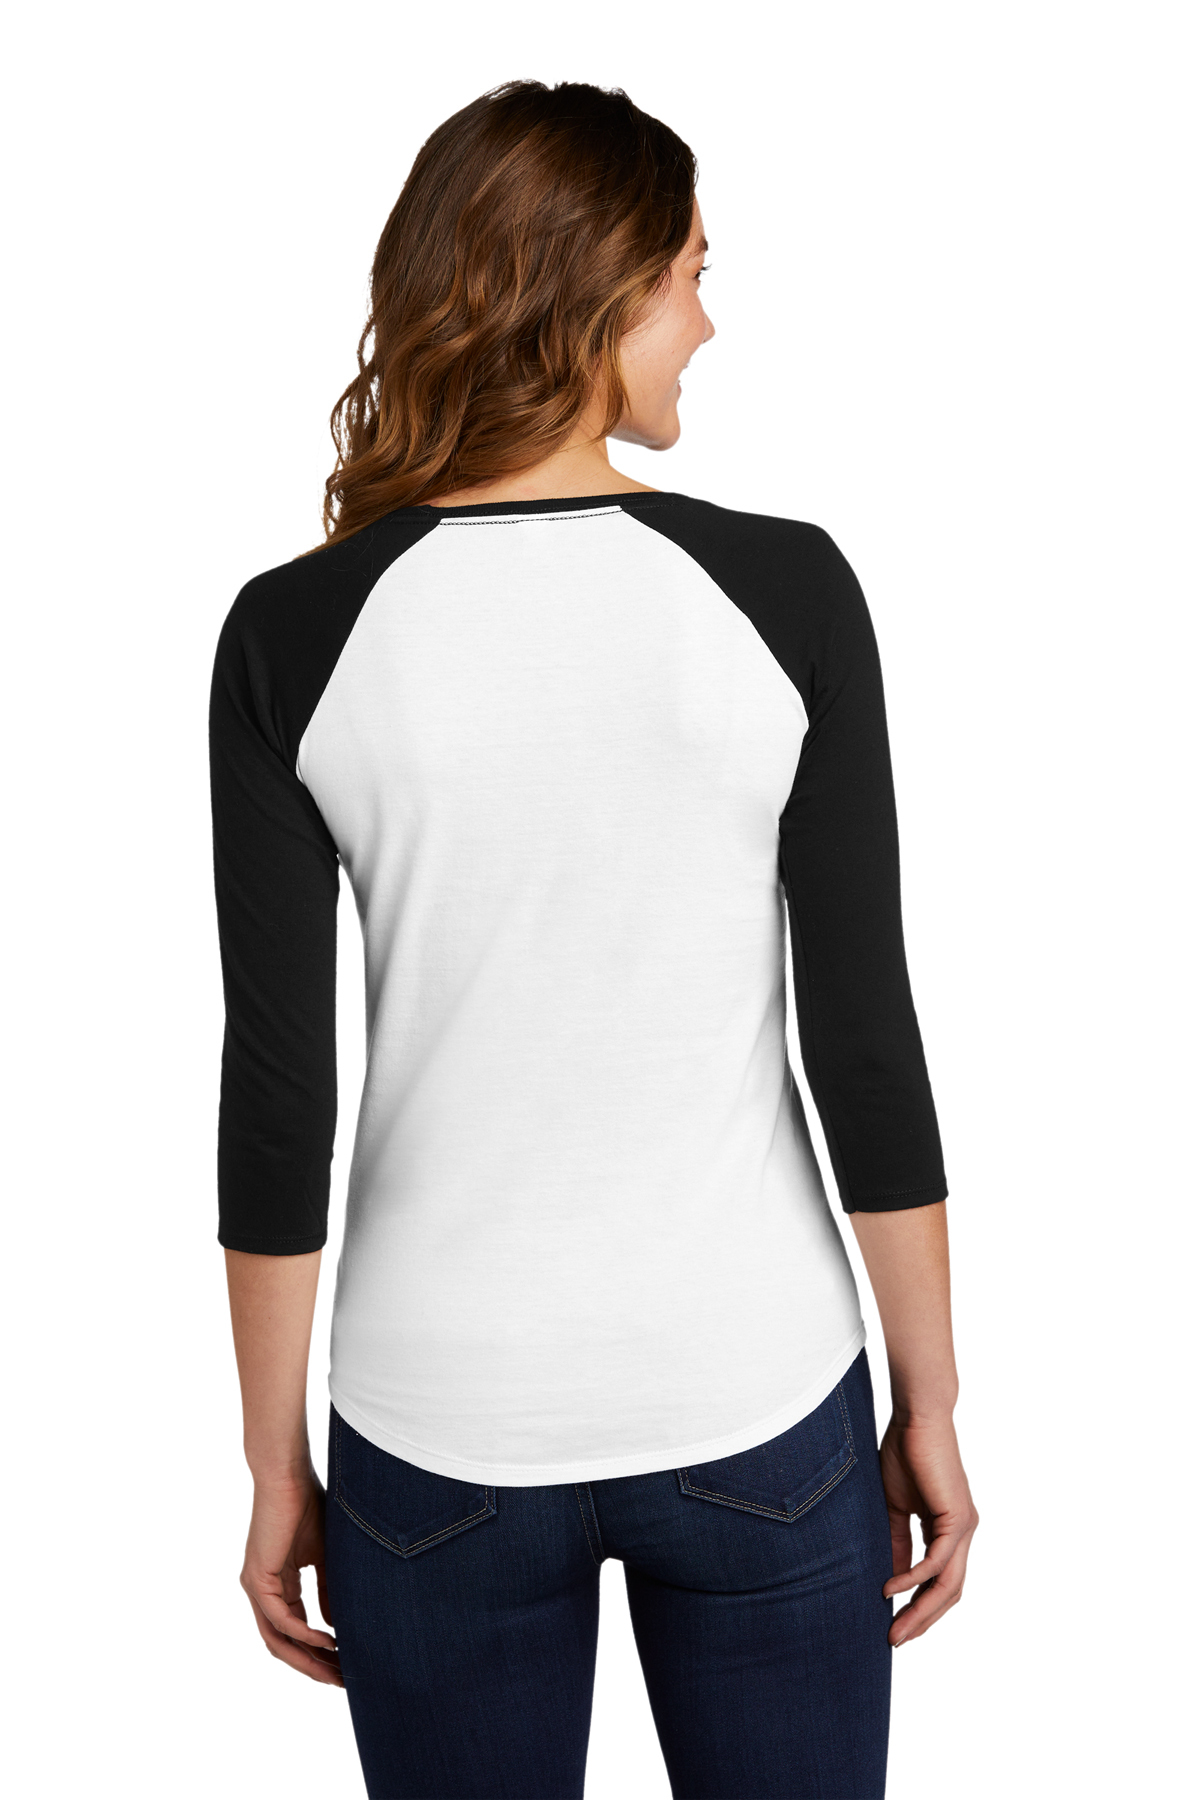 District Women's Fitted Very Important Tee 3/4-Sleeve Raglan 